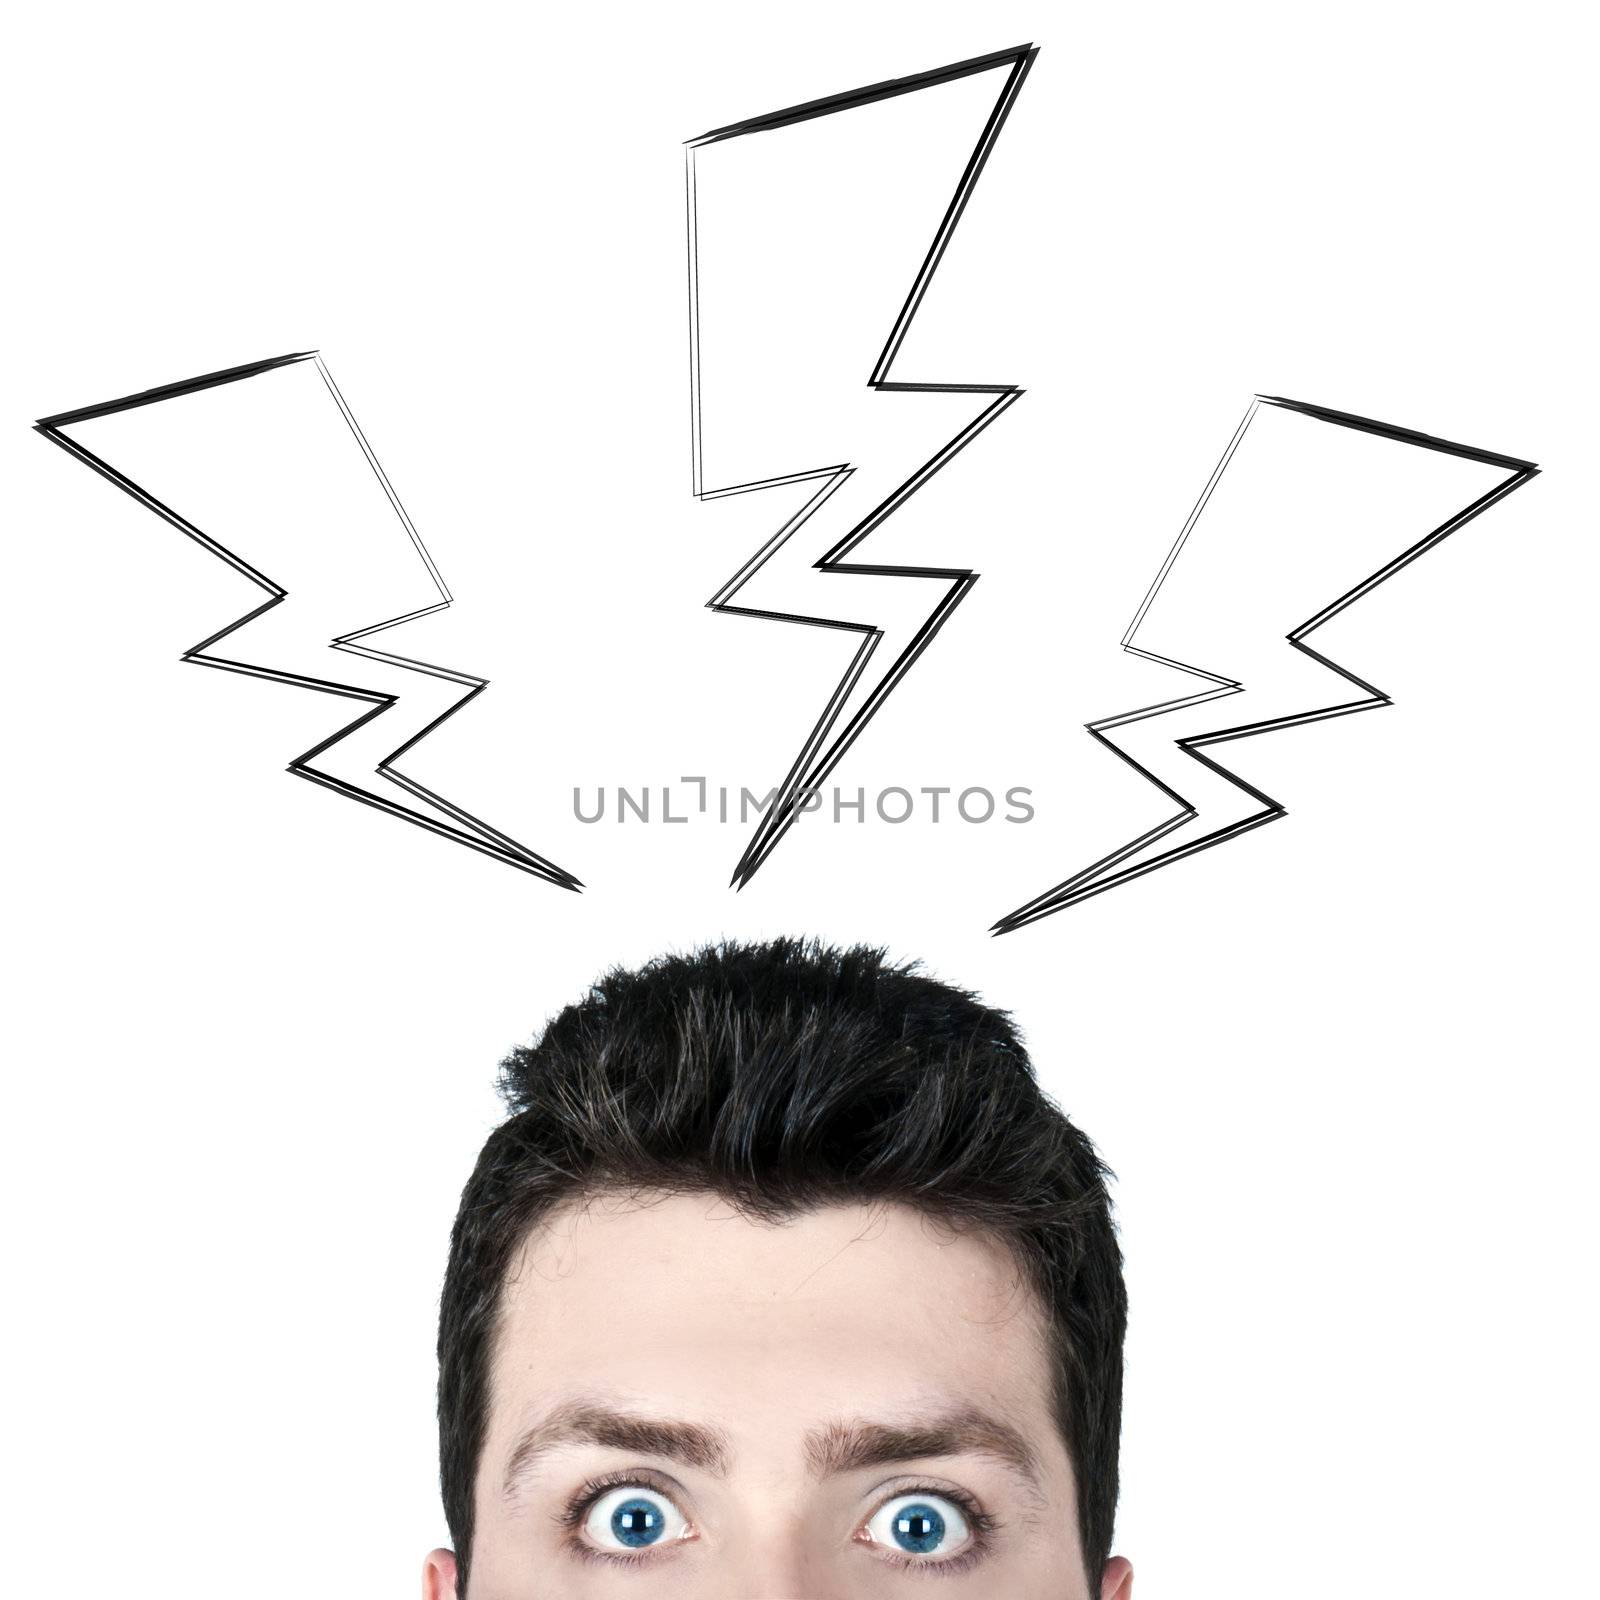 Young man surprised with wide open eyes and a thunder icon above his head